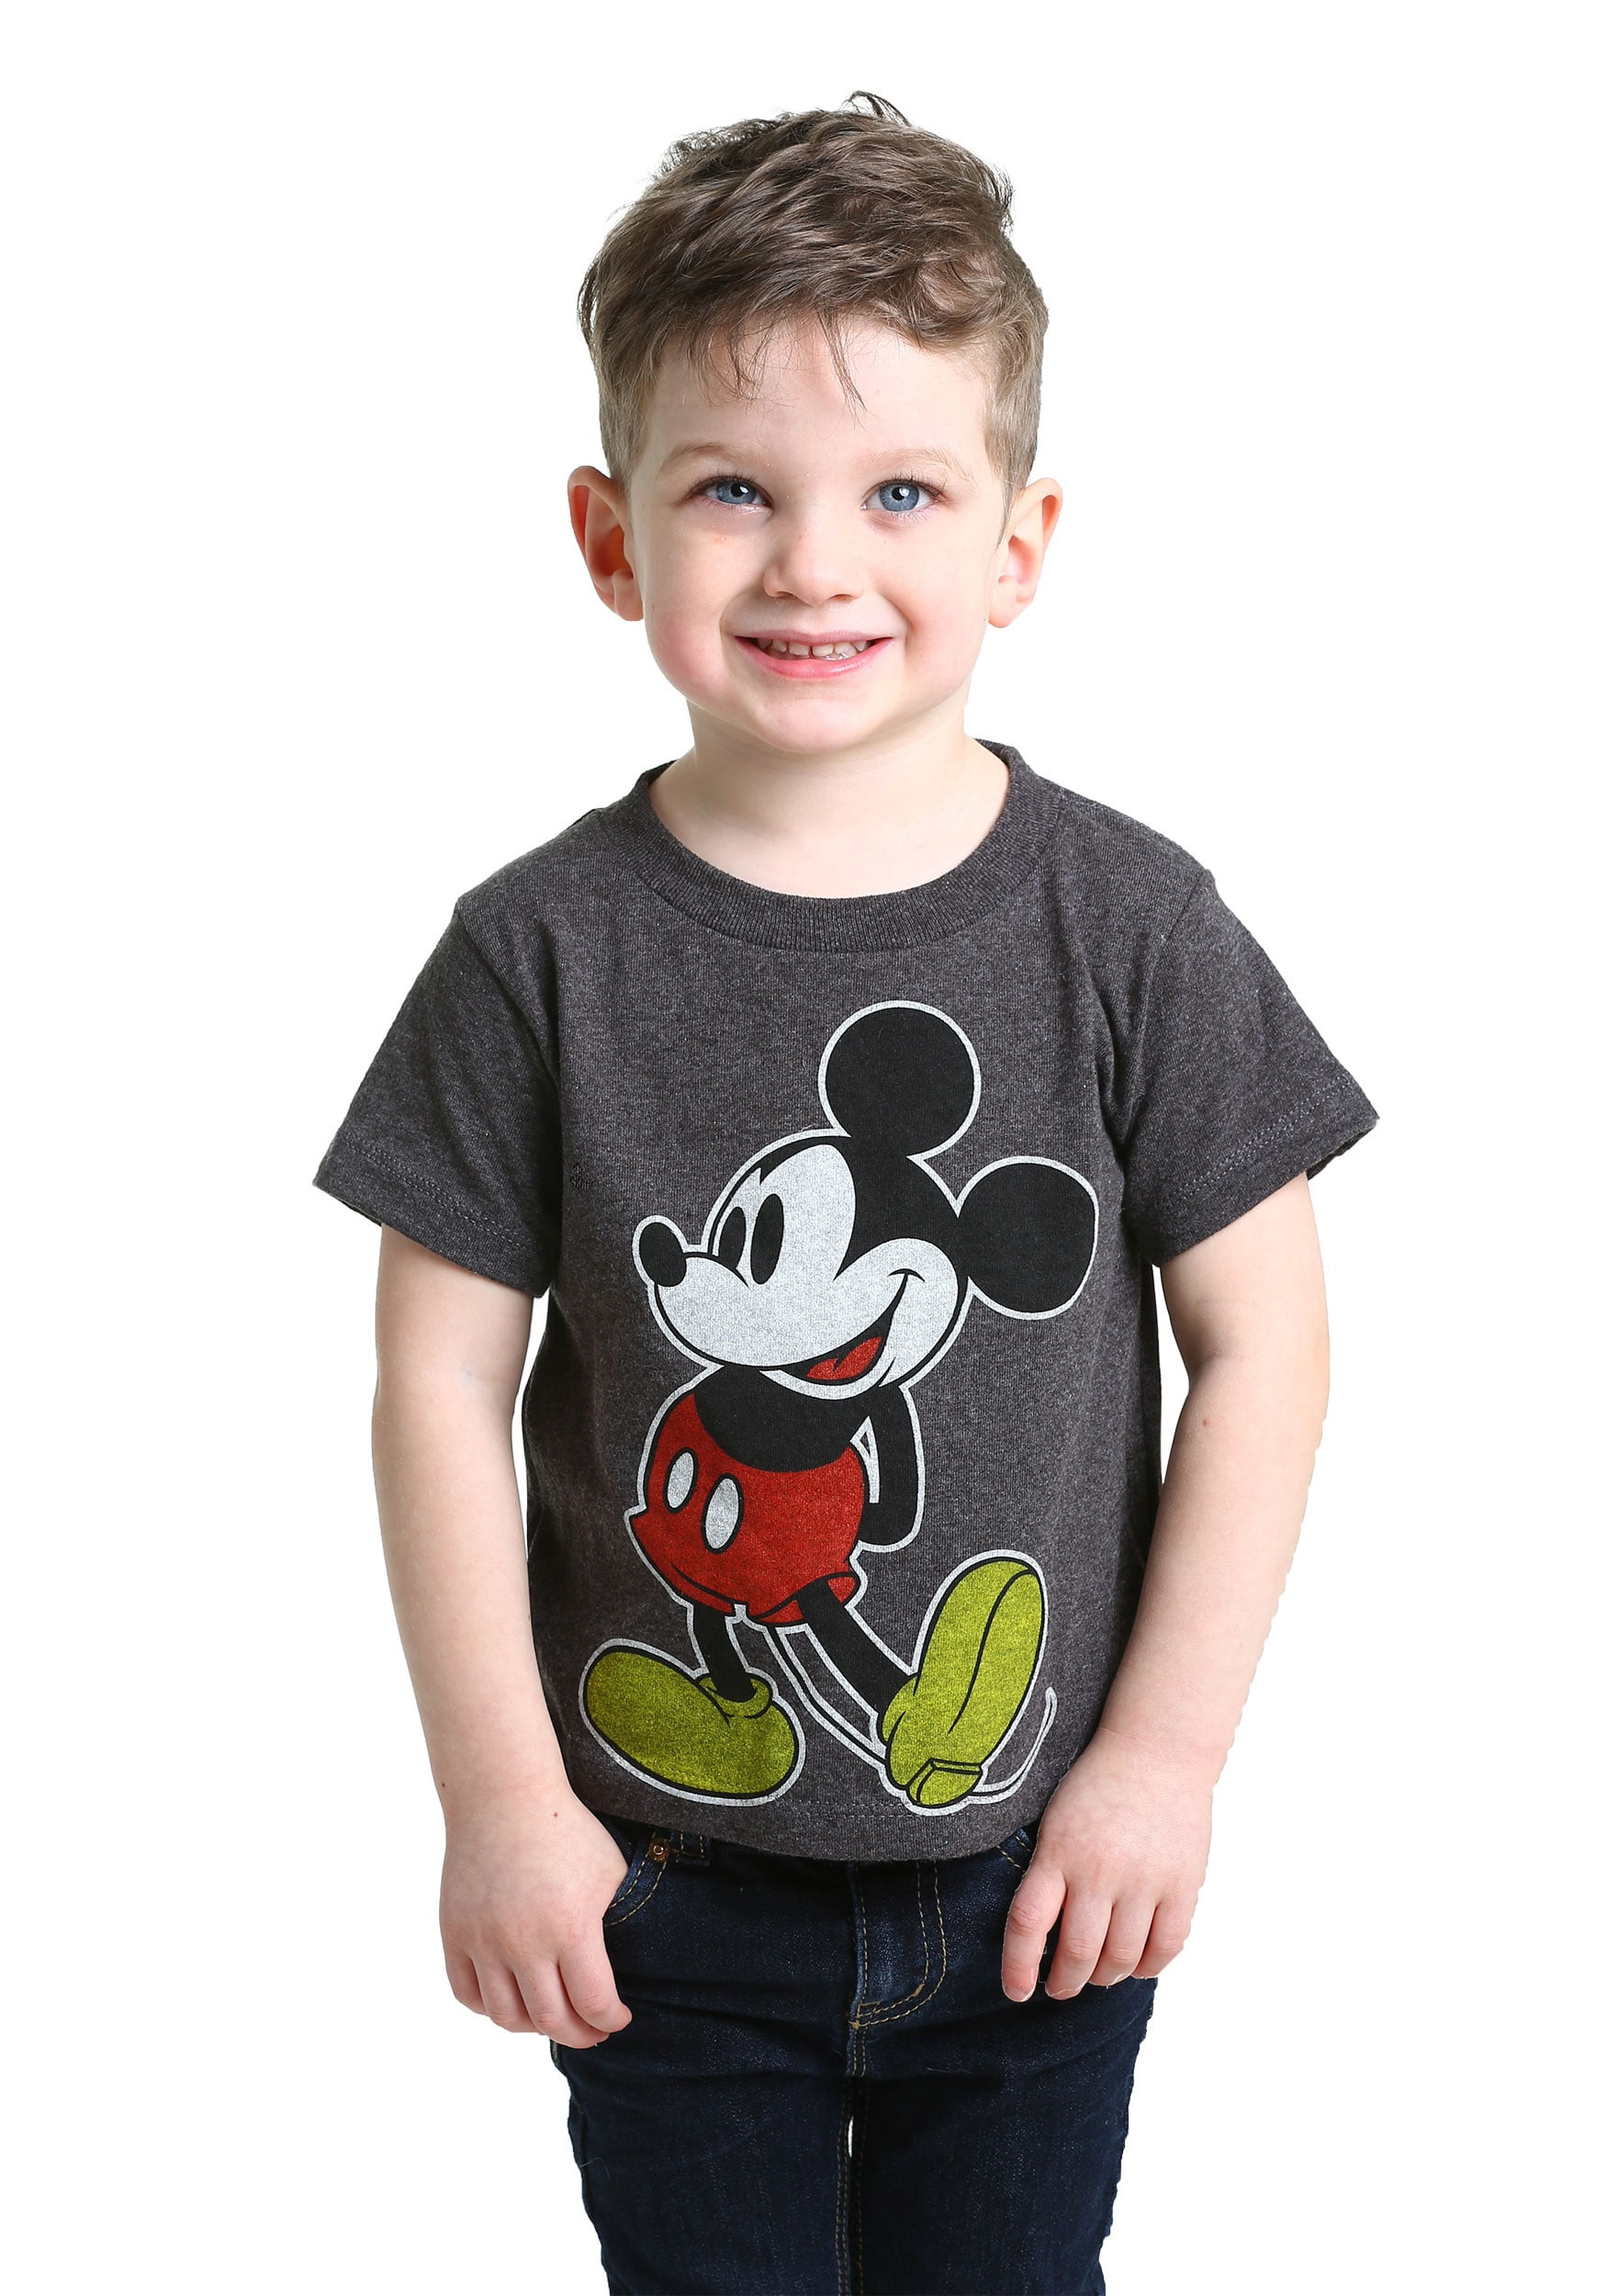 Details about   Toddler Boys Mickey Mouse Shirt 